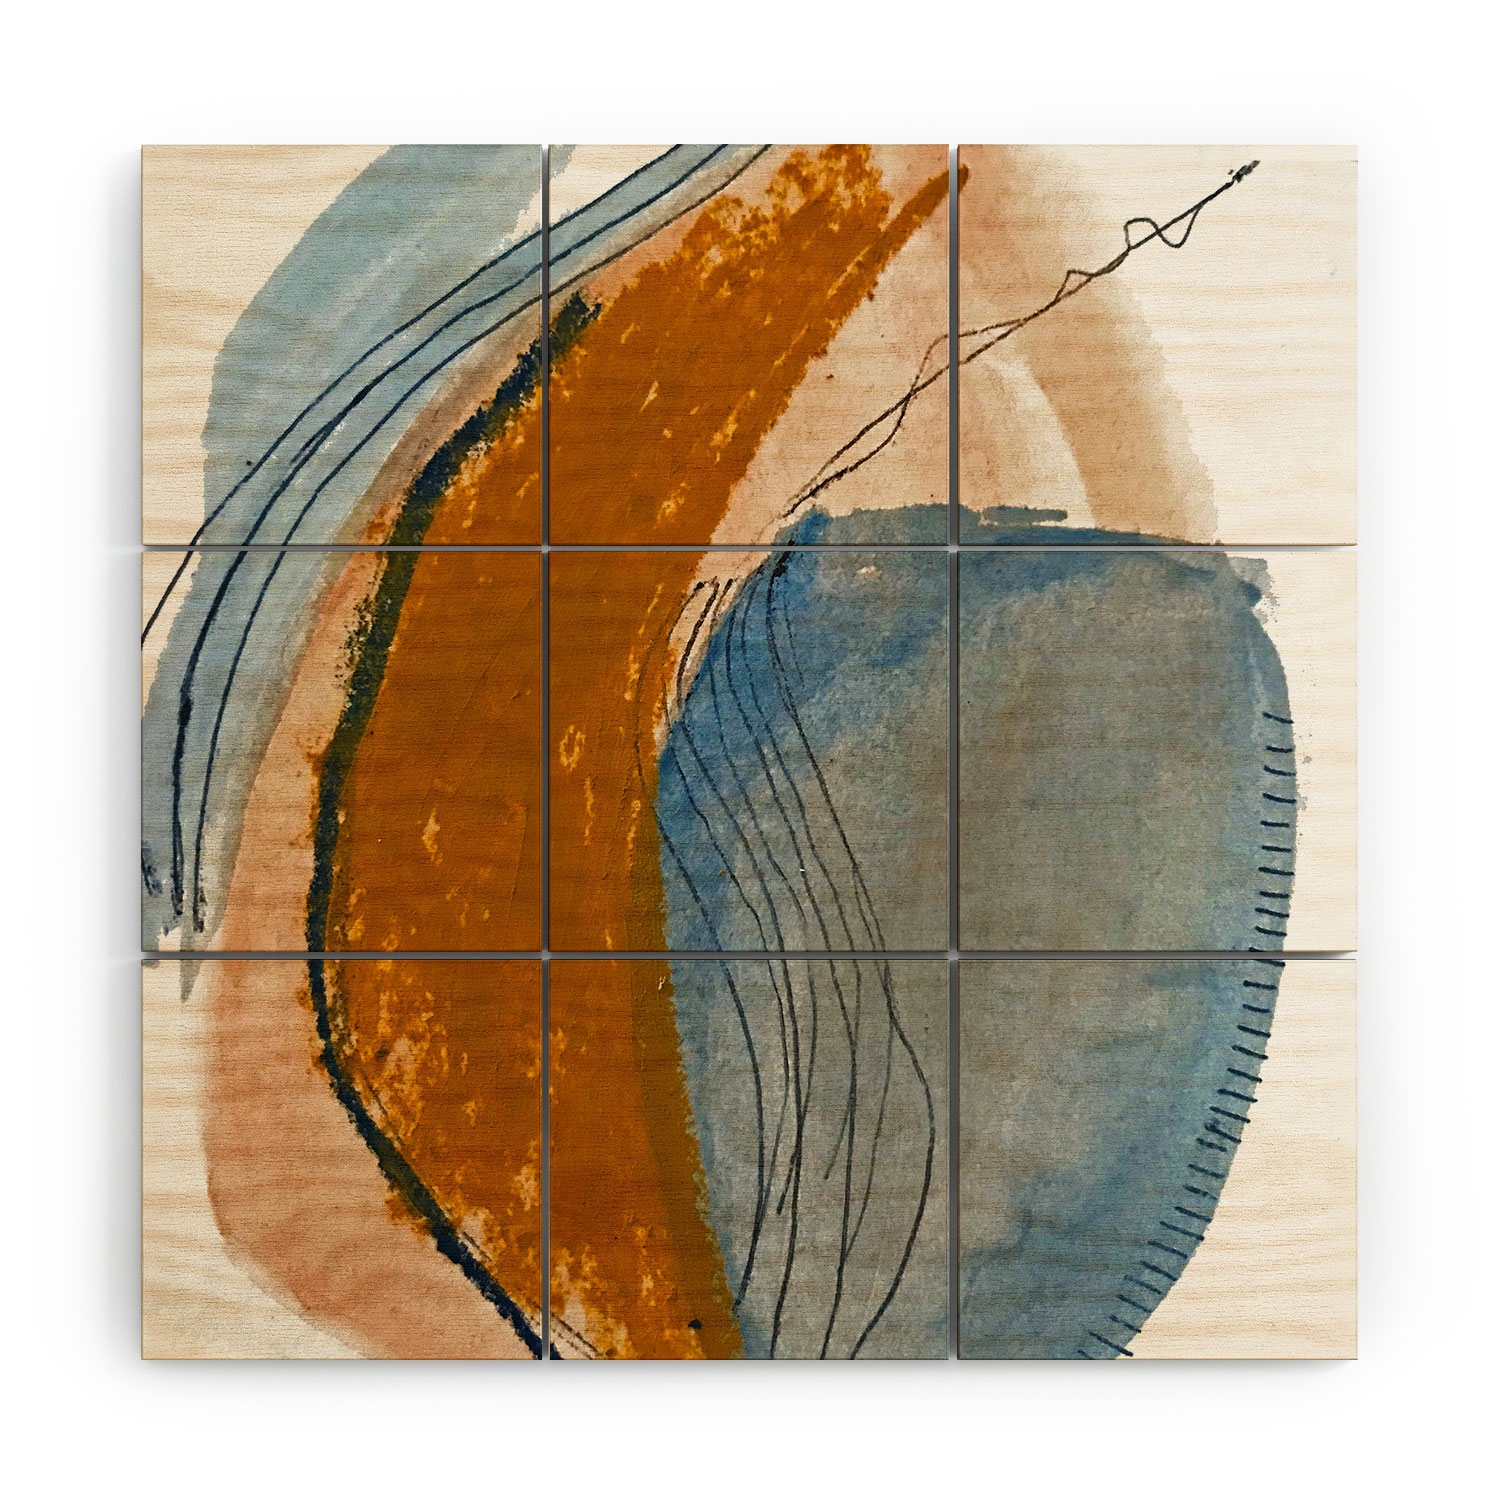 Gentle Breeze A Minimal Abstract by Alyssa Hamilton Art - Wood Wall Mural4' x 4' (Nine 16" Wood Squares) - Image 3